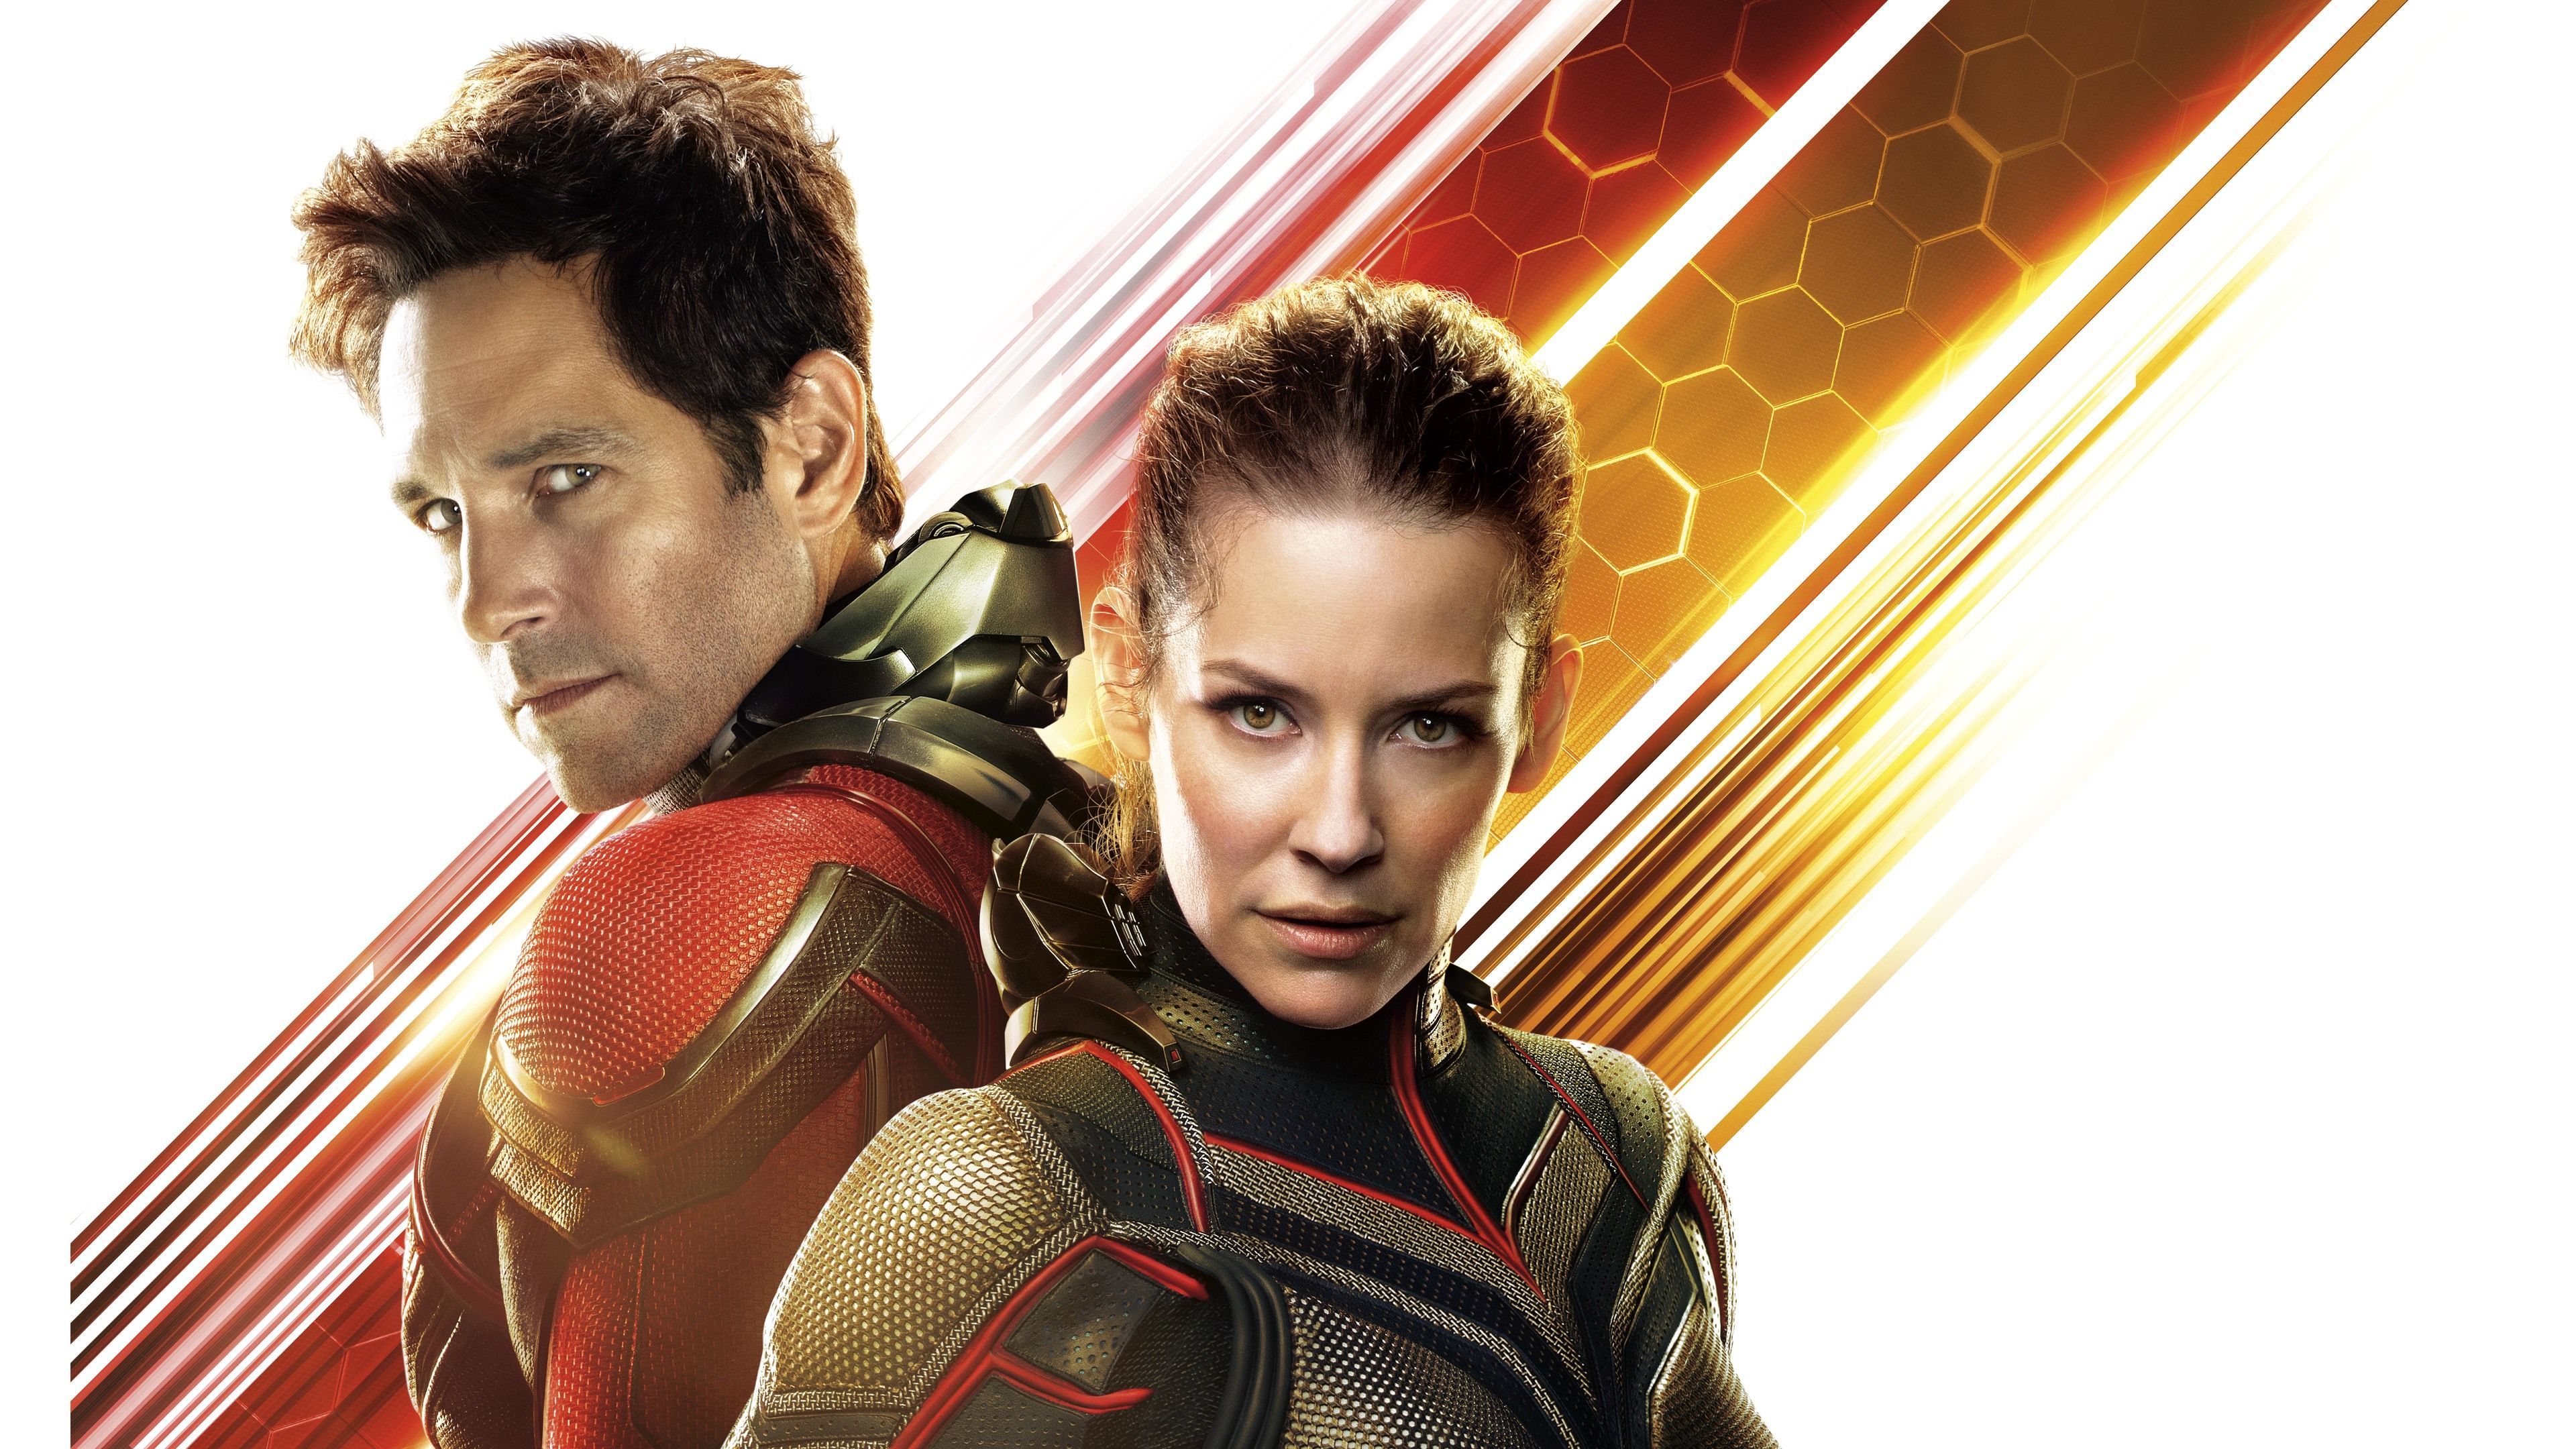 Ant Man And The Wasp Movie 4k Movies Wallpaper, Hd Wallpaper, Ant Man Wallpaper, Ant Man And The Wasp Wallpaper, 8k Wallpaper, 5. Wasp Movie, Ant Man, Movies